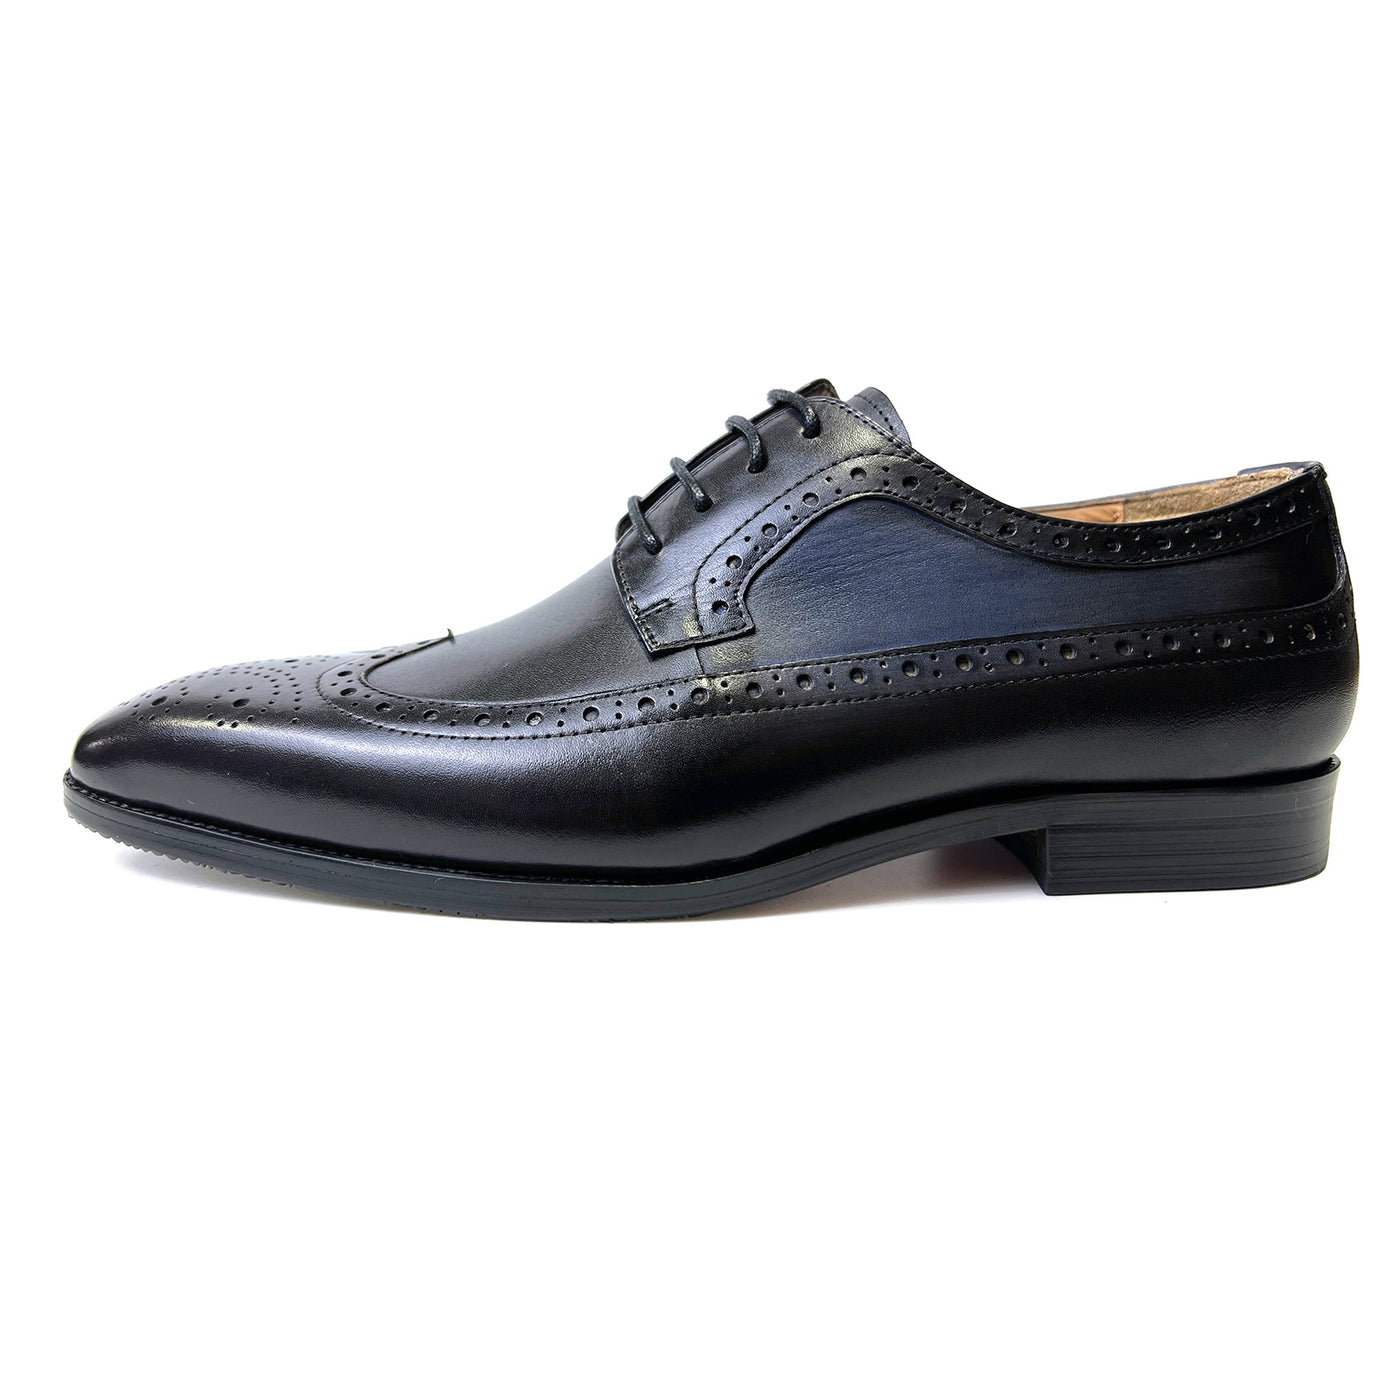 L'ITALIANO - Men's Luxurious Oxford Dress Shoes (Black with Blue shaded sides)